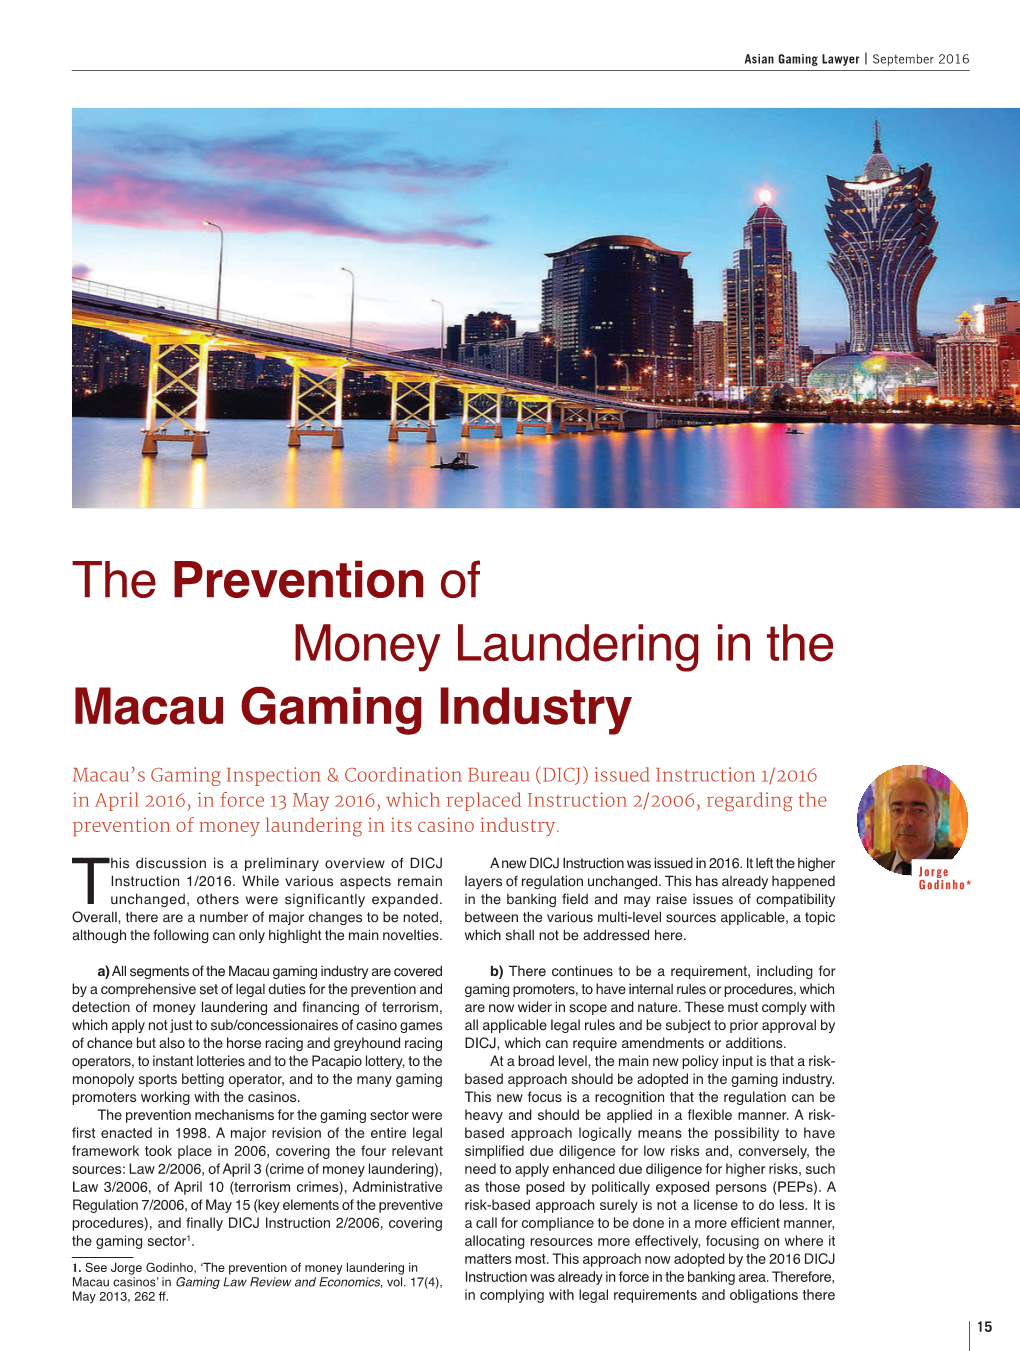 The Prevention of Money Laundering in the Macau Gaming Industry